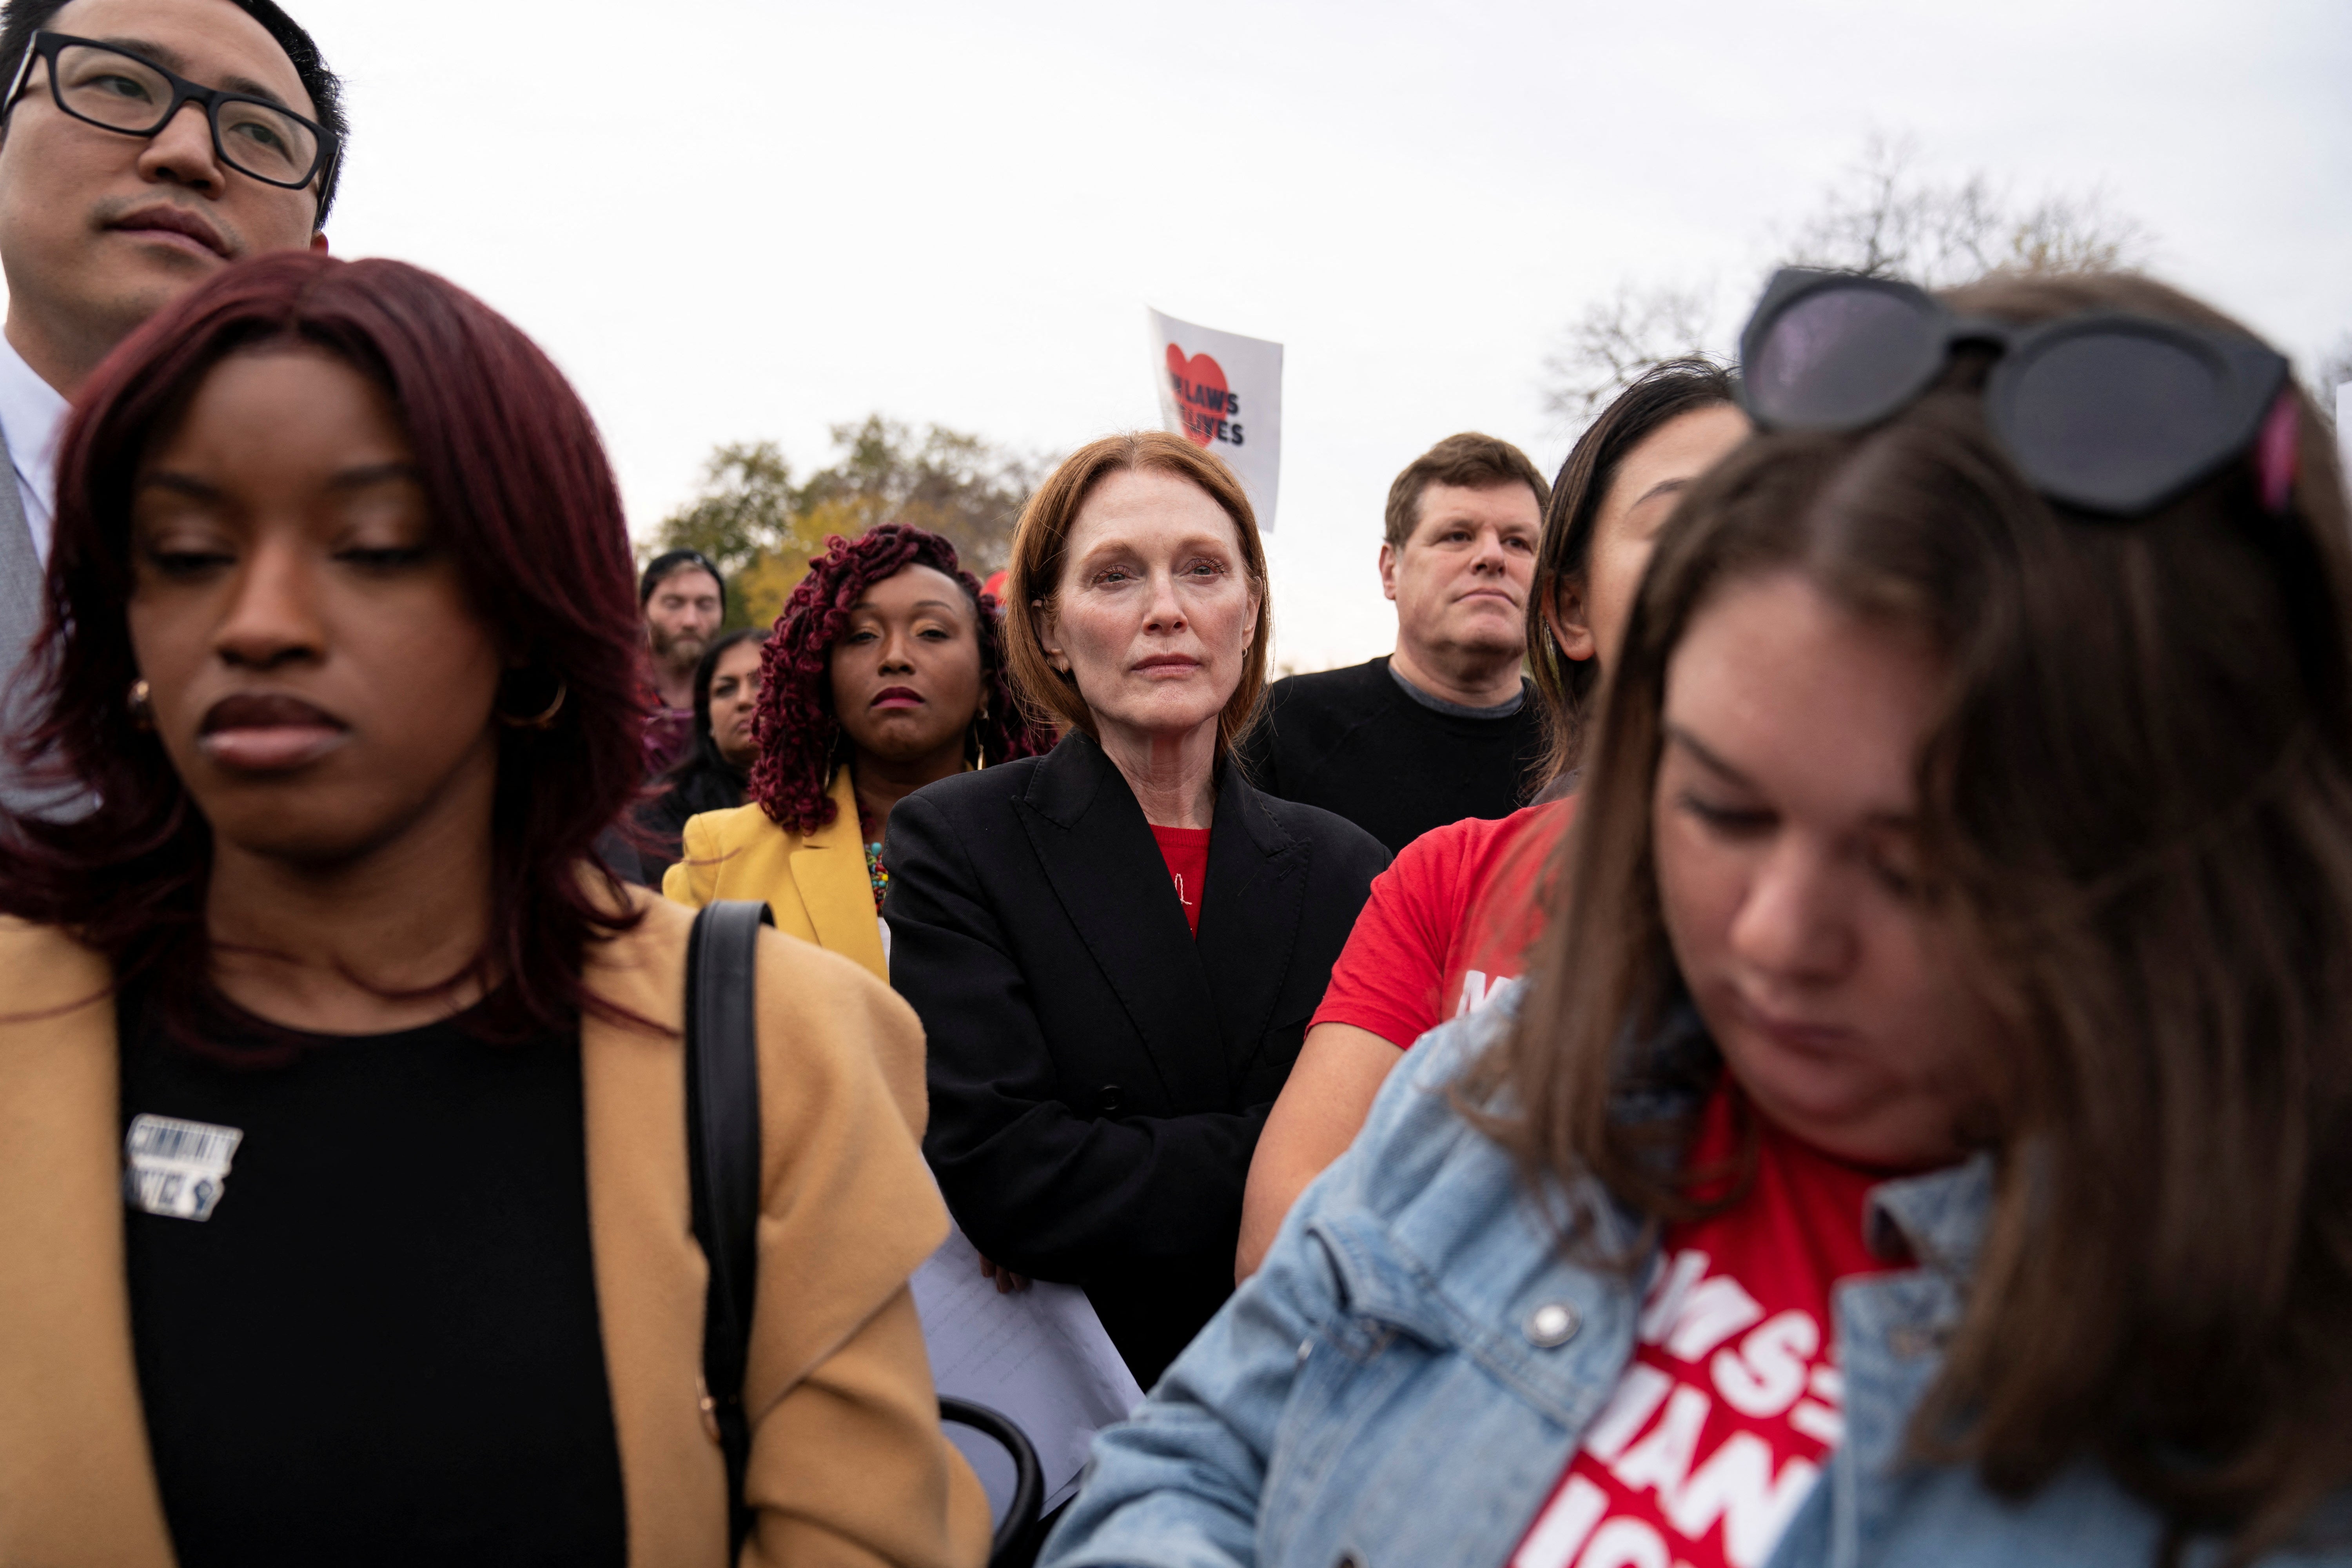 Actor Julianne Moore, who chairs the Everytown Creative Council, attended a rally outside the US Supreme Court during oral arguments in United States v Rahimi on 7 November